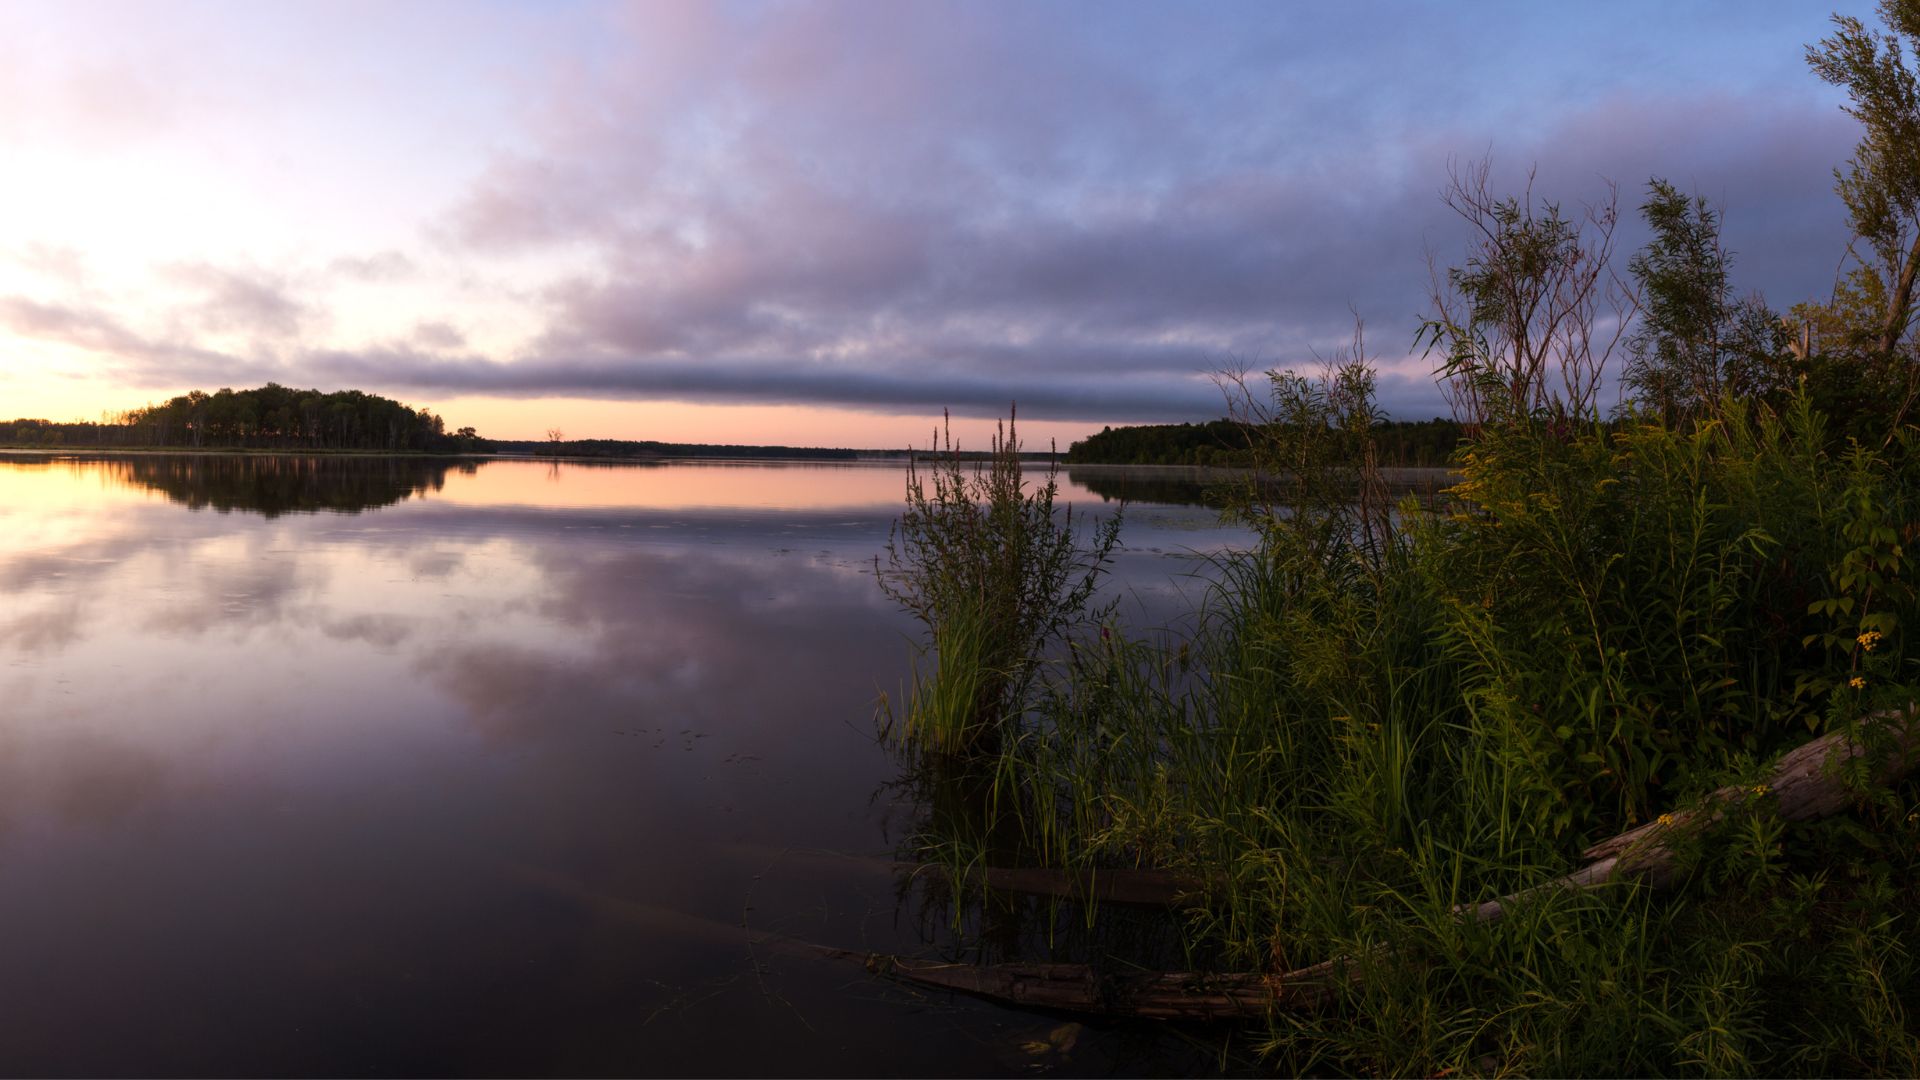 Photo of a northern lake at sunset with evergreen trees and shoreline grasses in the foreground.